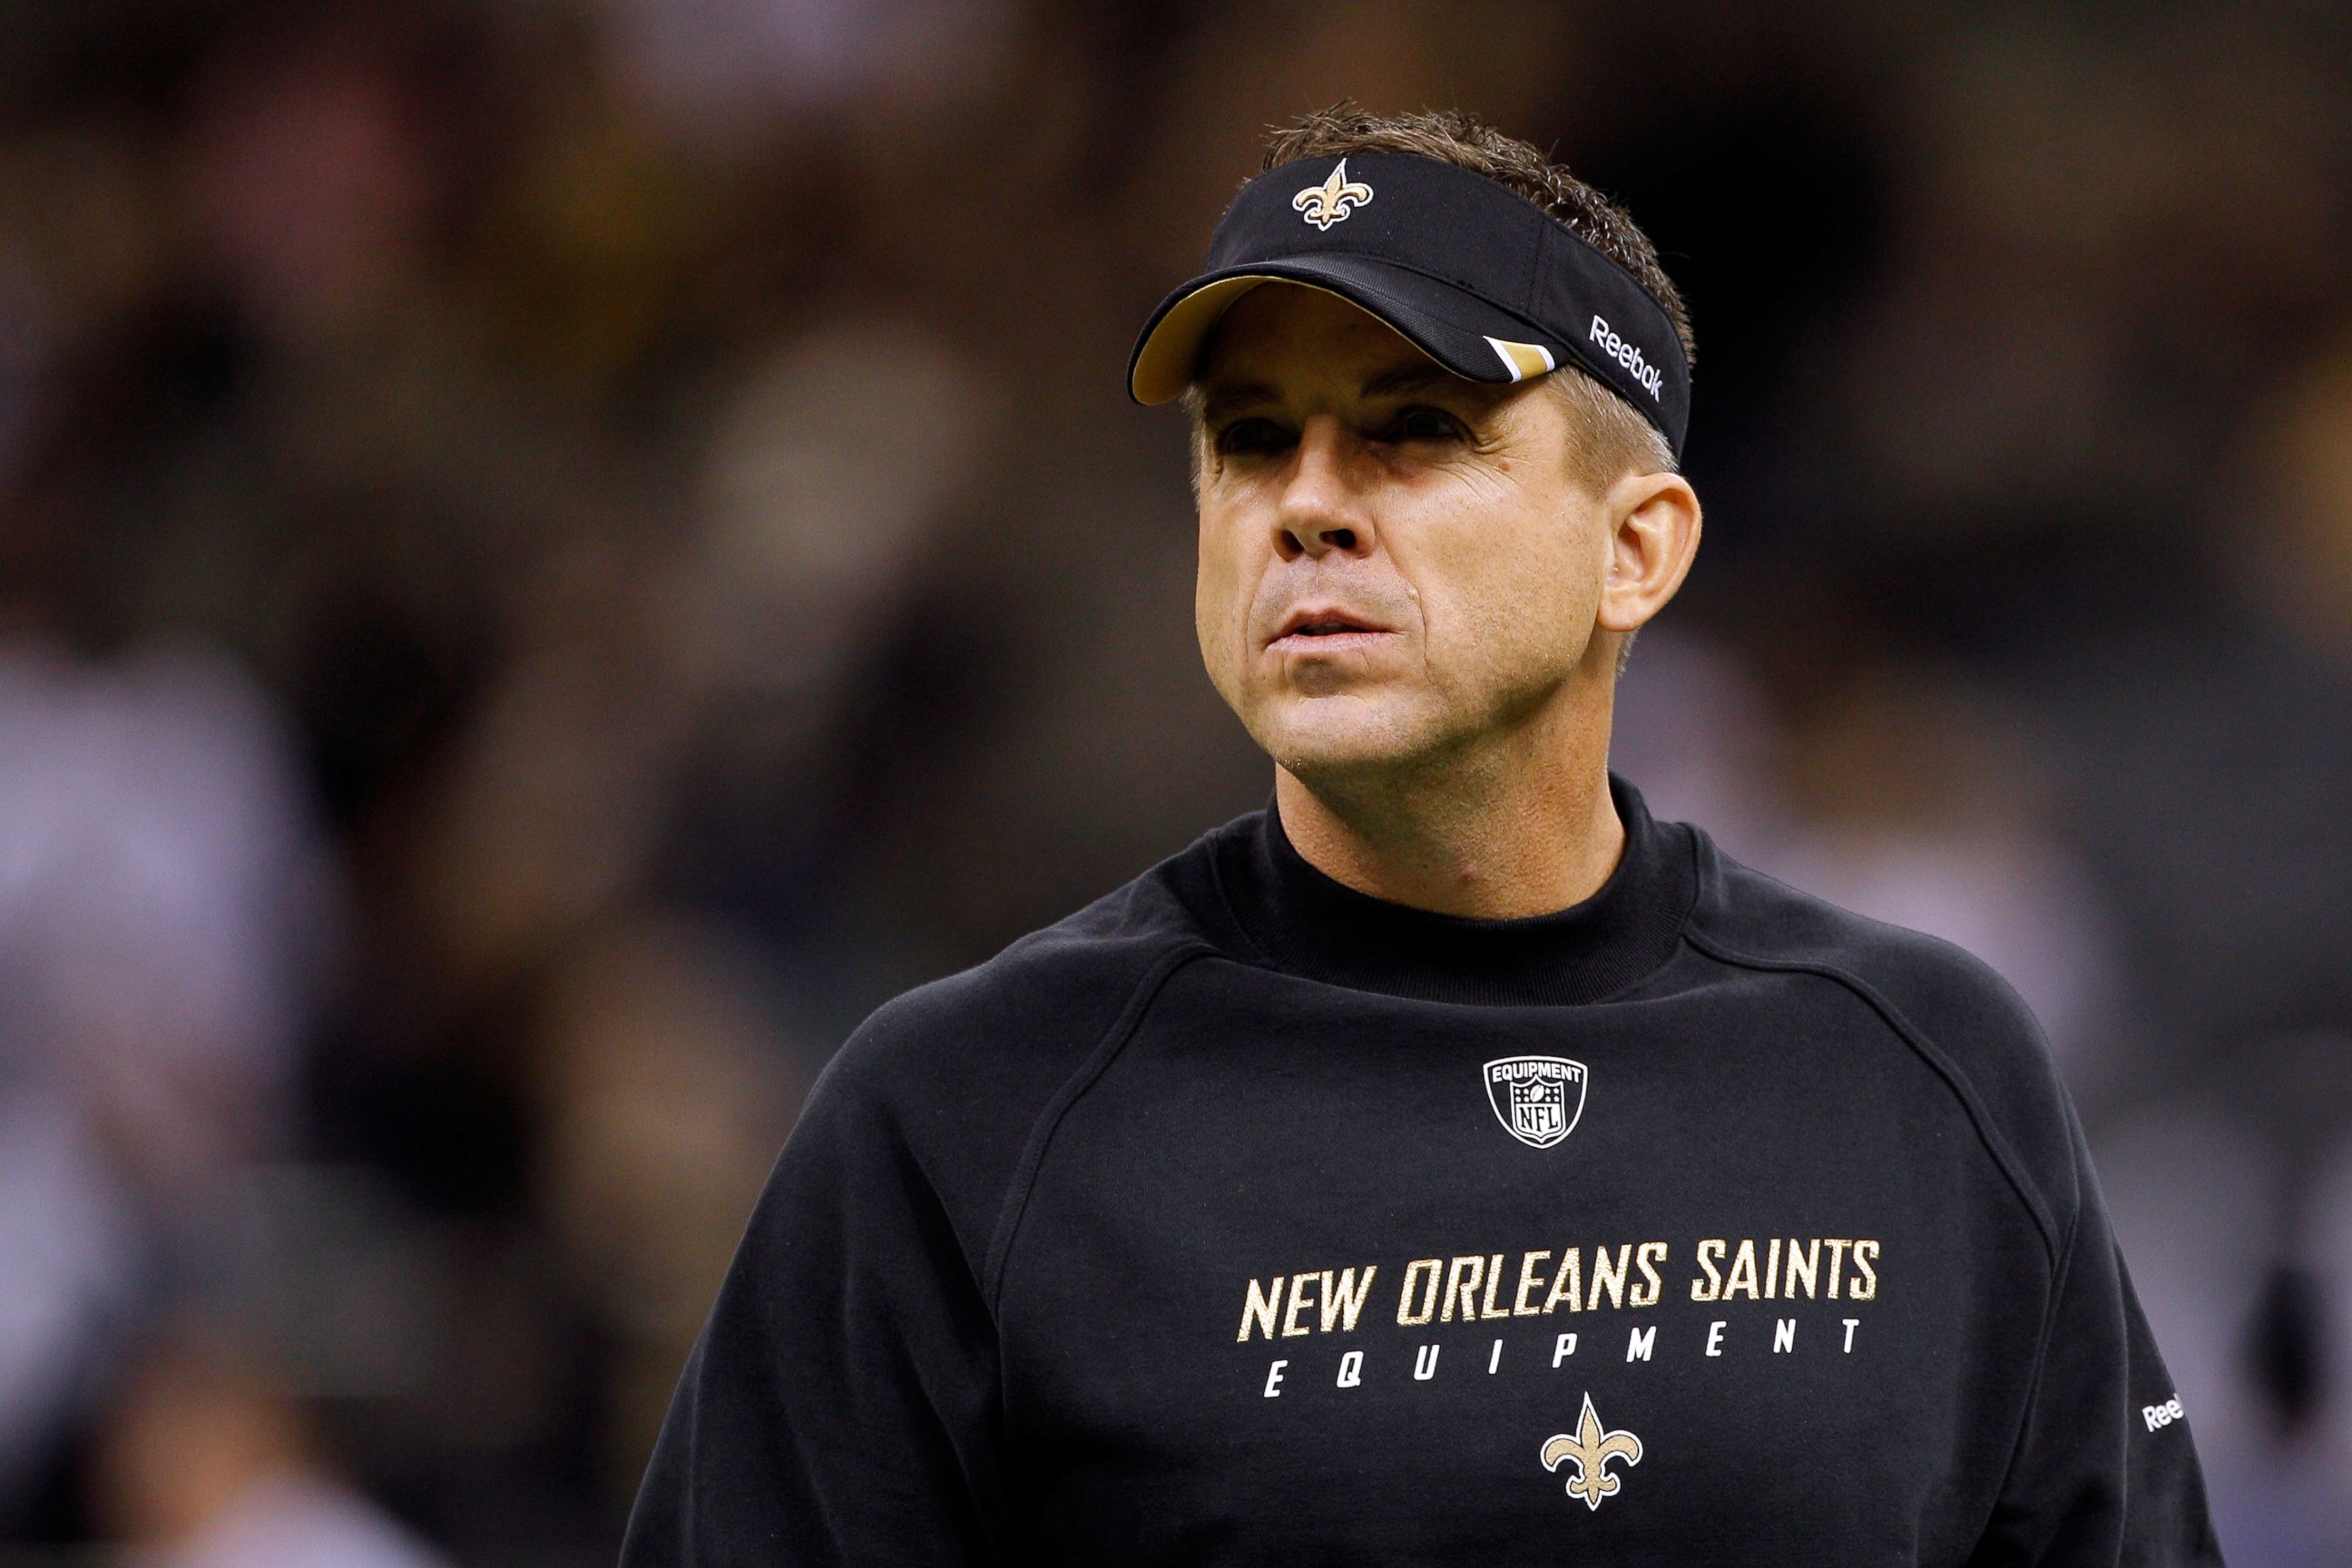 PHOTO: Sean Payton of the New Orleans Saints looks on during warm-ups